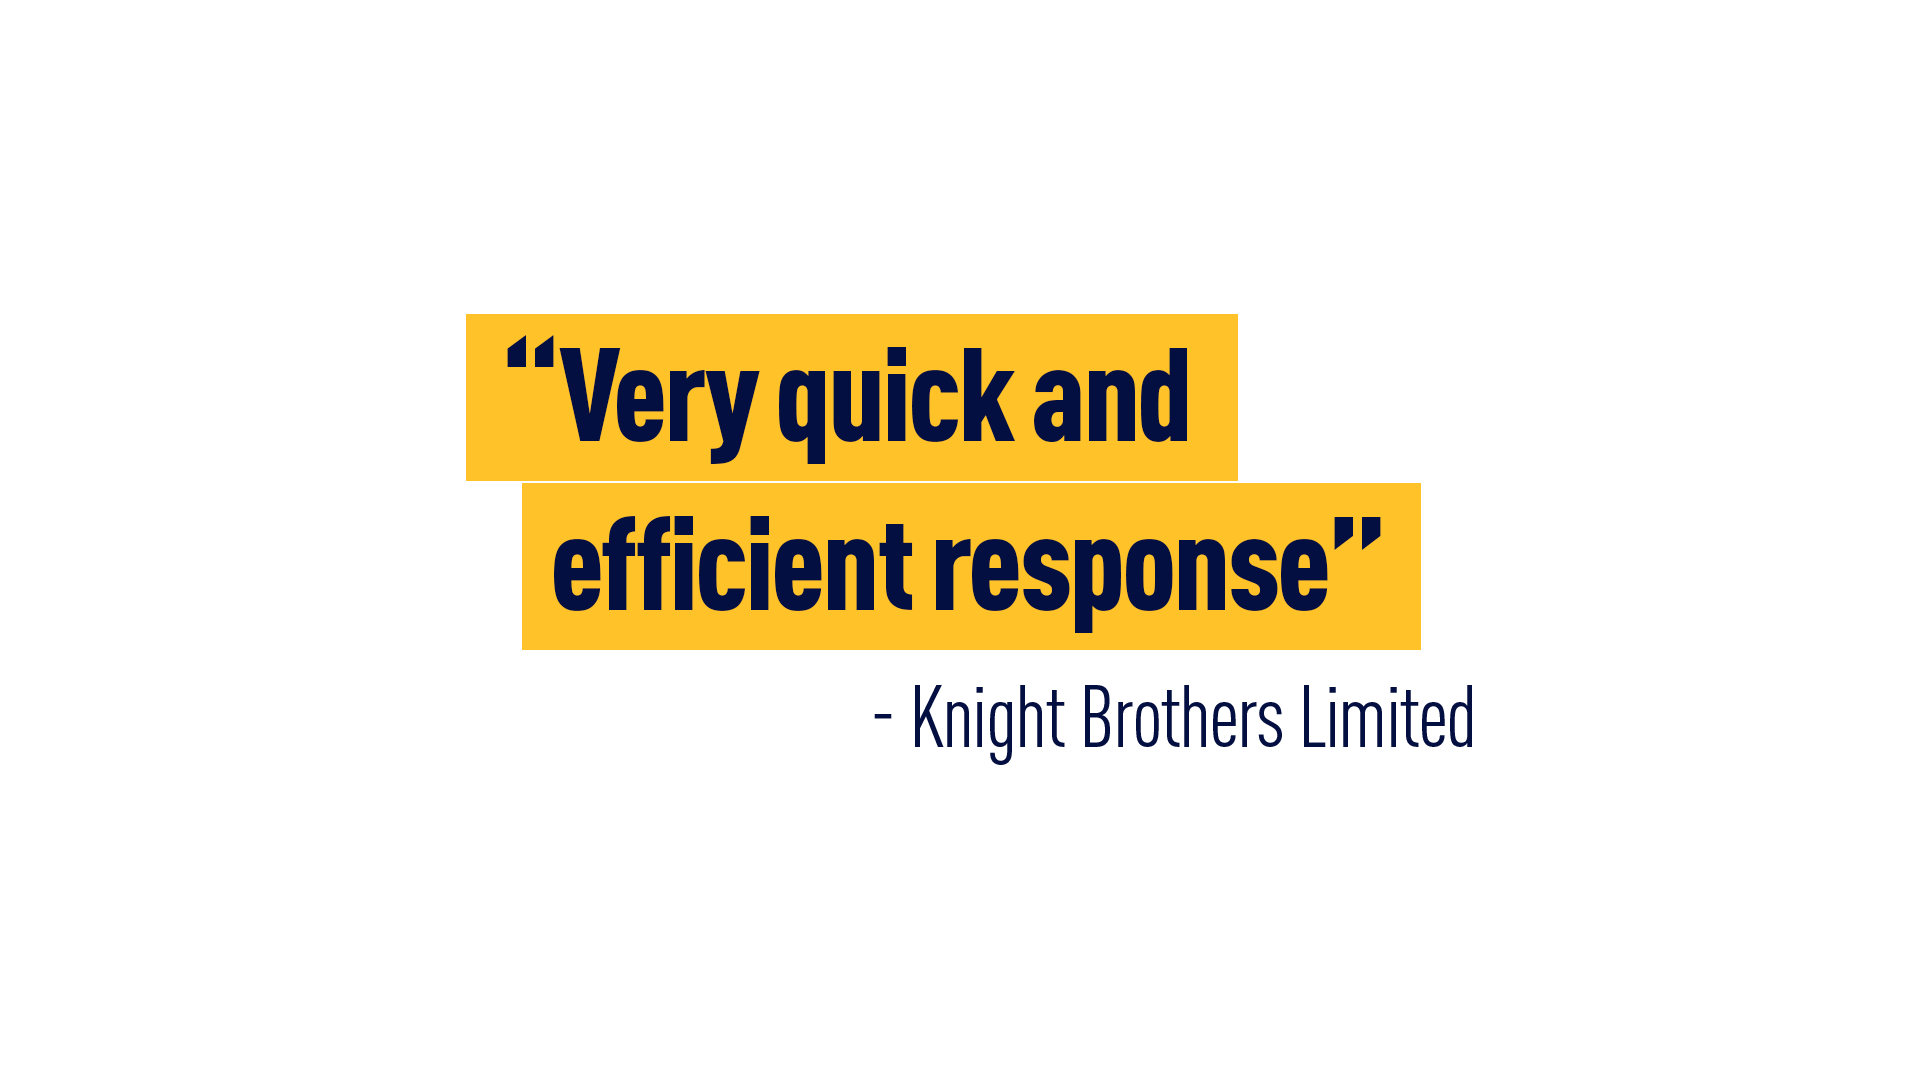 “Very quick and efficient response.”  Knight Brothers Limited